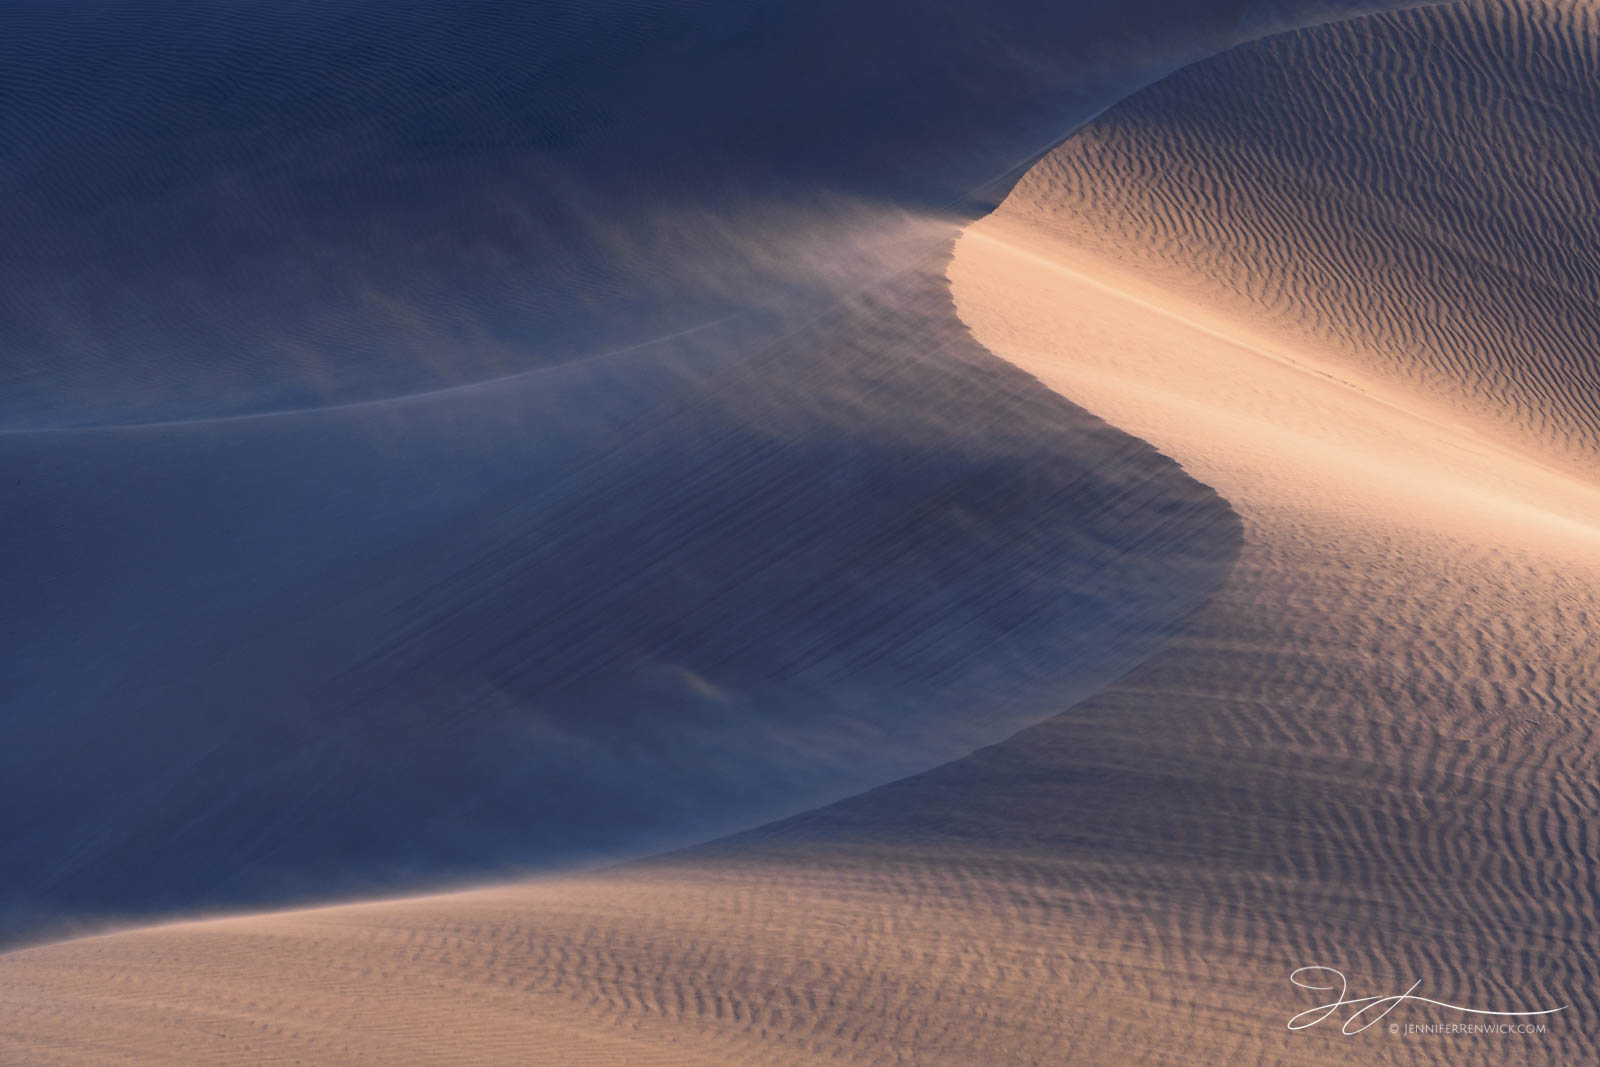 An illuminated dune glows during a late afternoon windstorm.